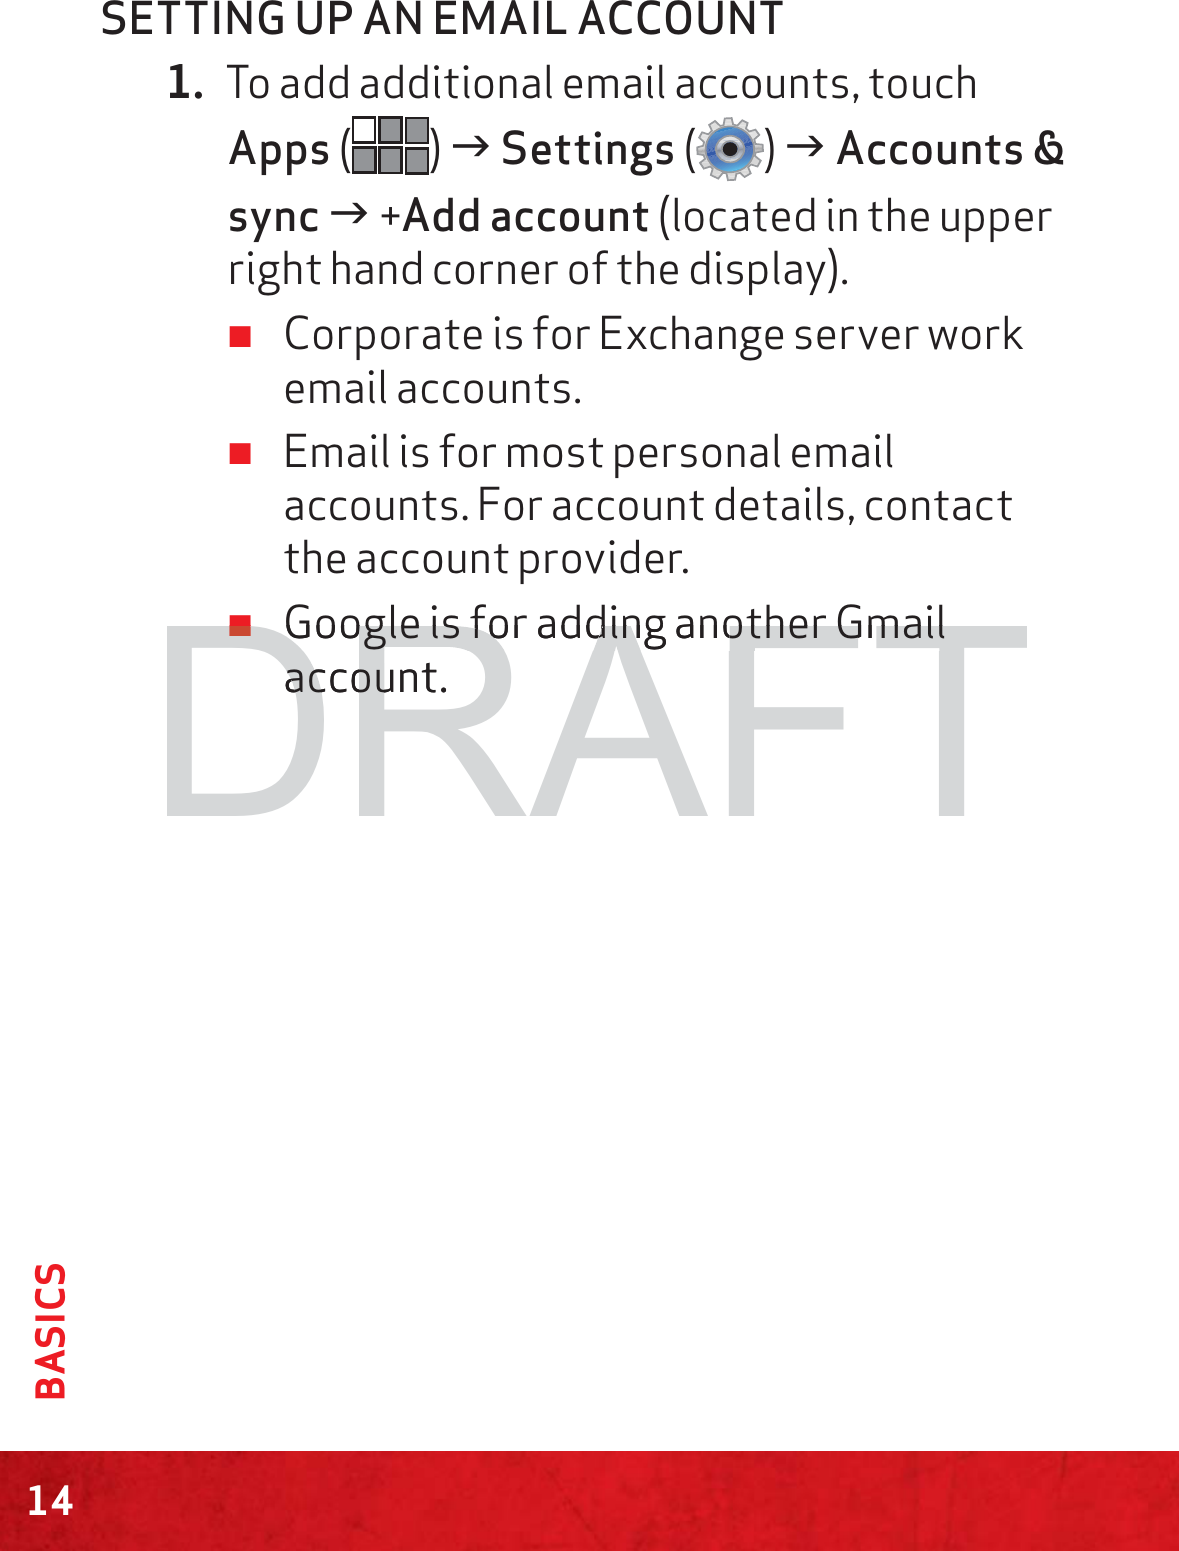 14BASICSSETTING UP AN EMAIL ACCOUNT1. To add additional email accounts, touch Apps () J Settings () J Accounts &amp; sync J +Add account (located in the upper right hand corner of the display). ≠Corporate is for Exchange server work email accounts. ≠Email is for most personal email accounts. For account details, contact the account provider. ≠Google is for adding another Gmail account.DRAFT≠≠Google is for adding another Gmail Google is for adding another Gmail account.accou